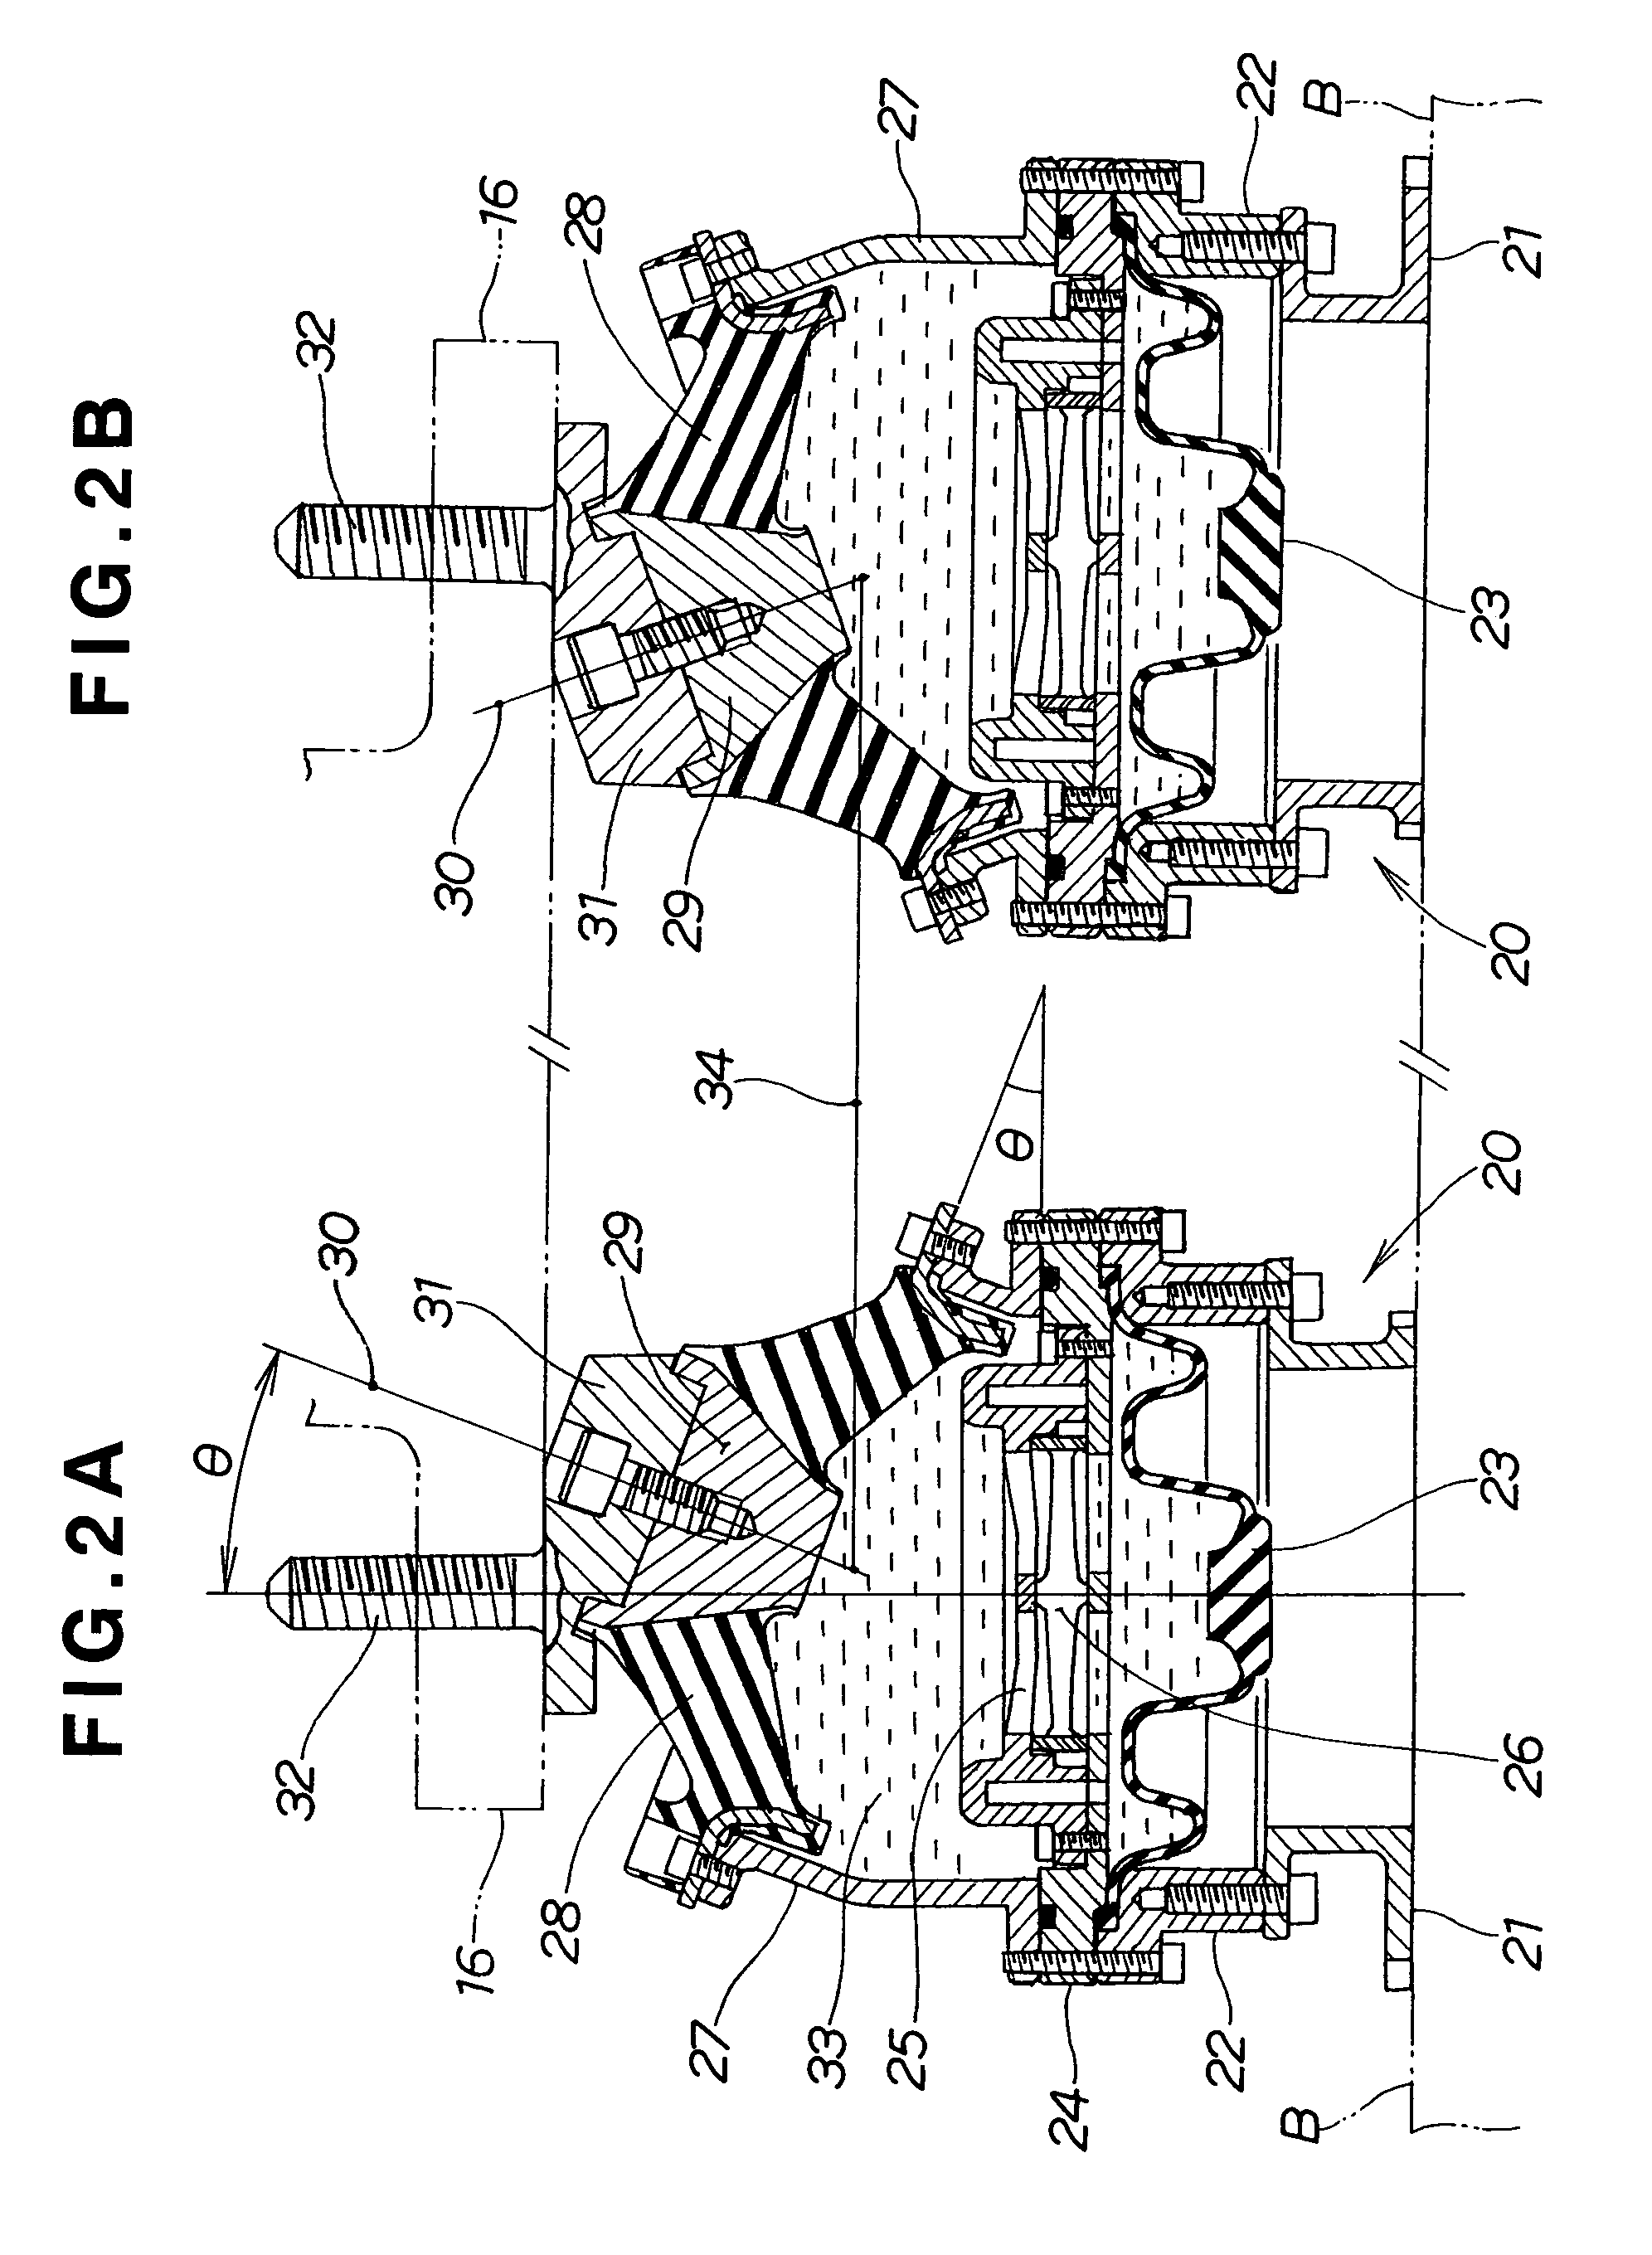 Support structure for transversal engine